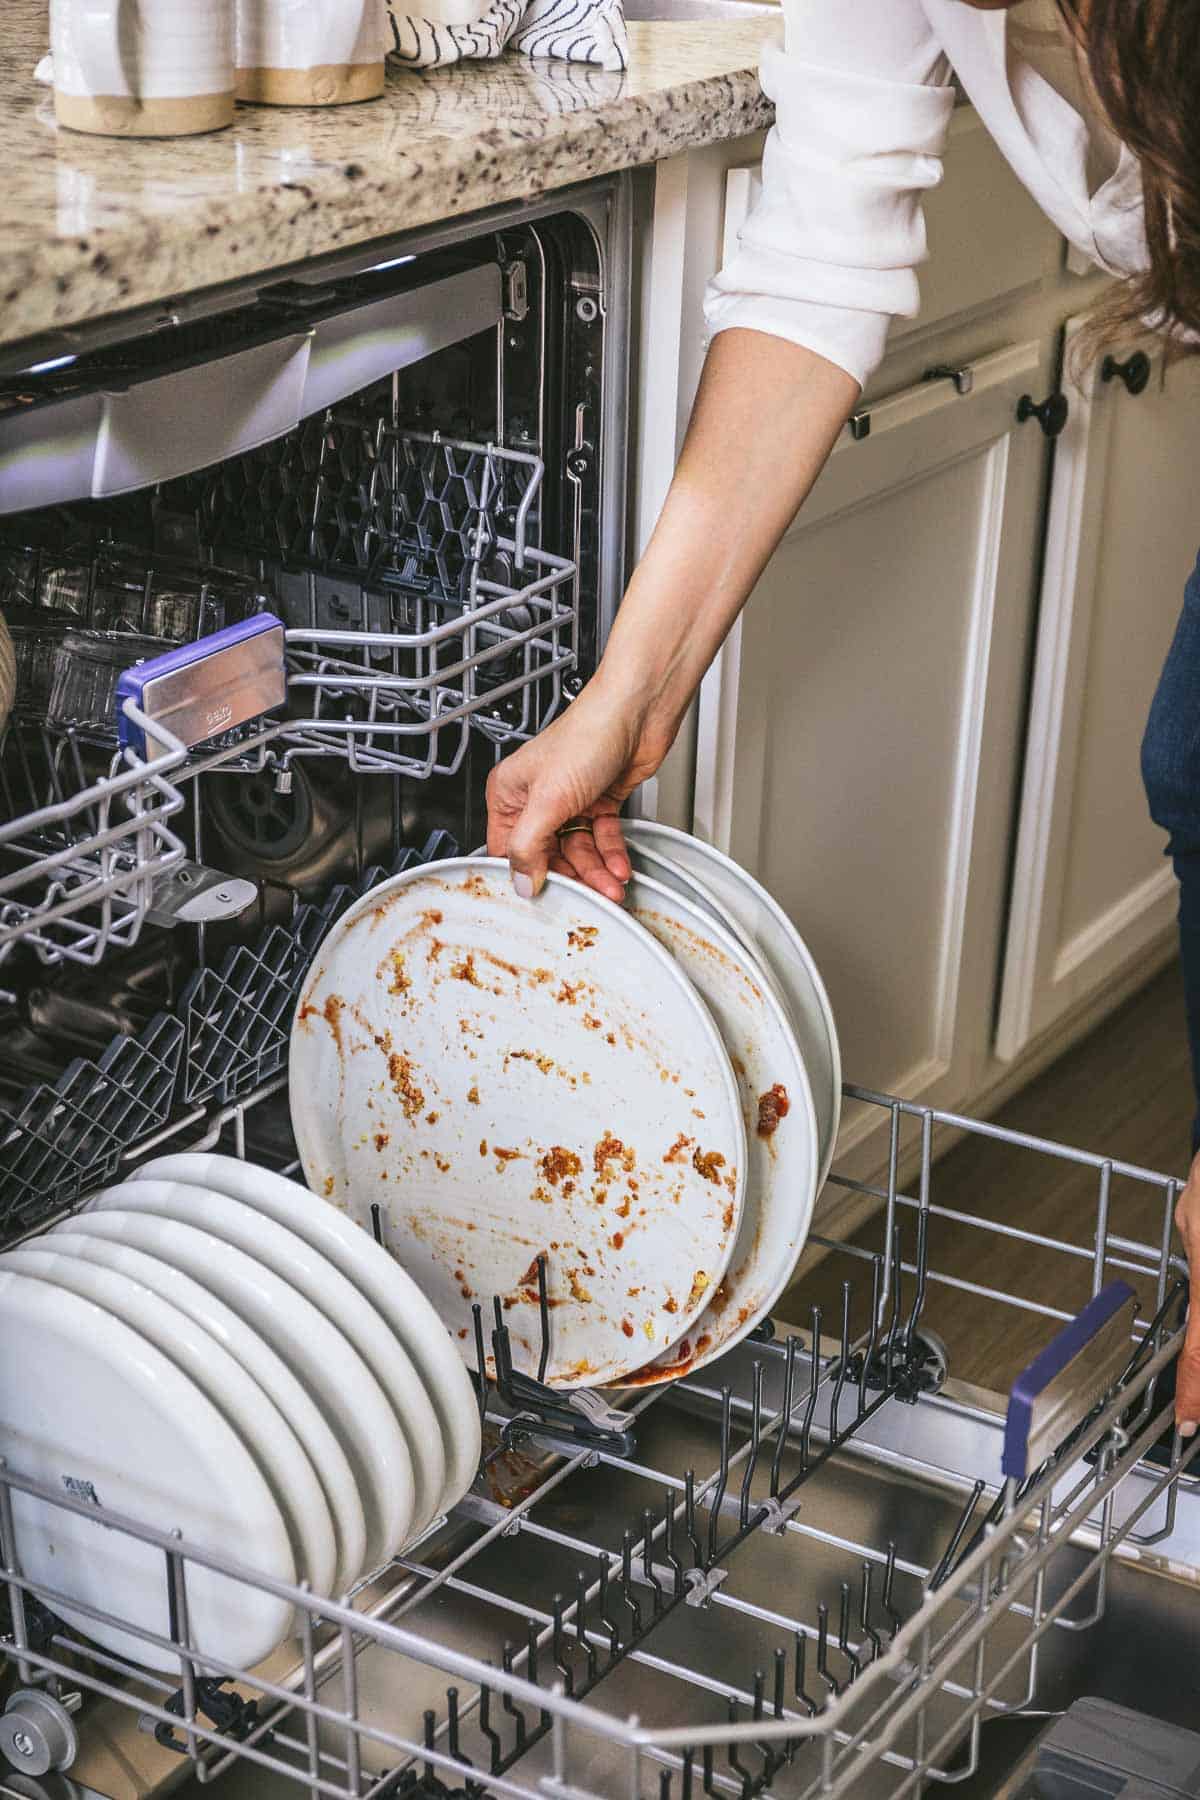 Woman placing a dirty dish in a dishwasher.